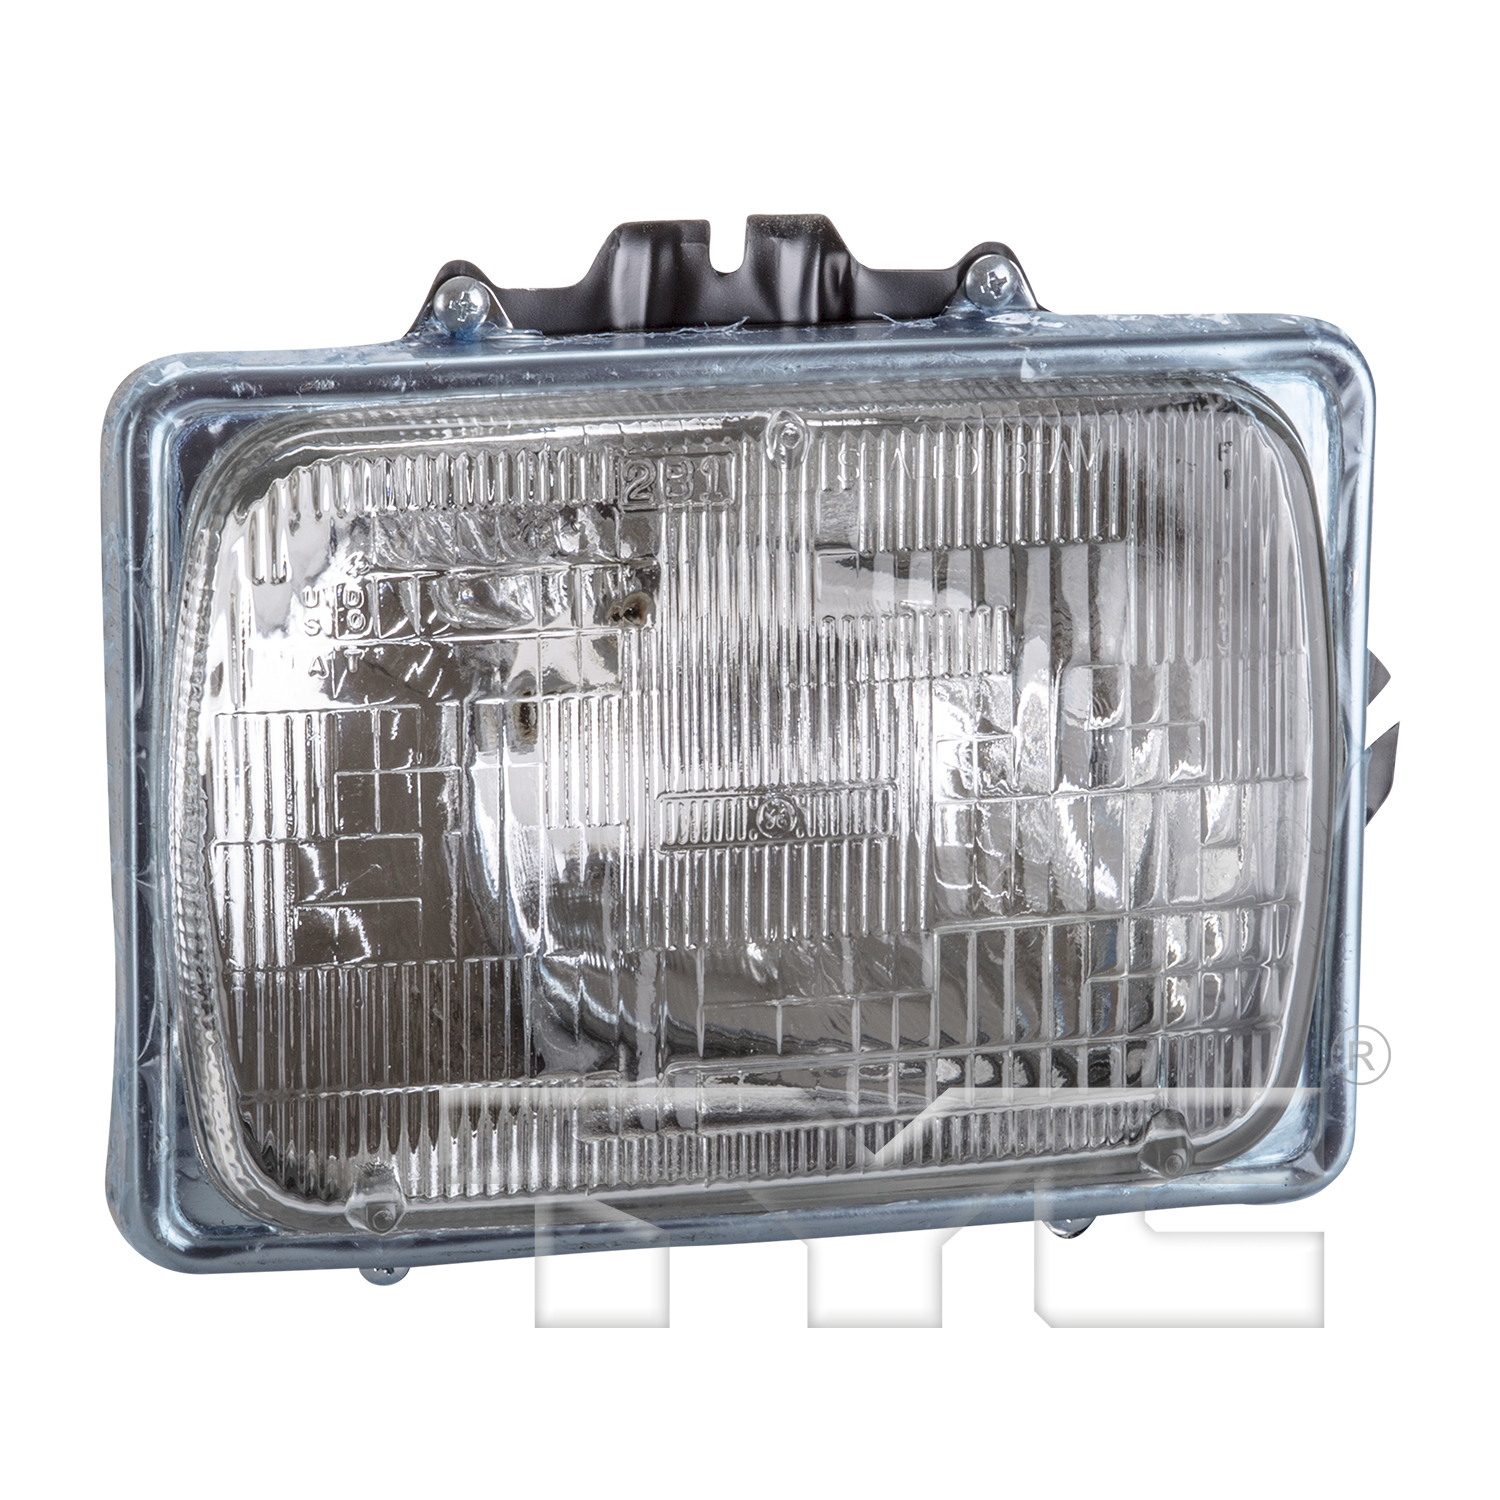 Aftermarket HEADLIGHTS for FORD - E-550 SUPER DUTY, E-550 SUPER DUTY,03-03,RT Headlamp assy sealed beam